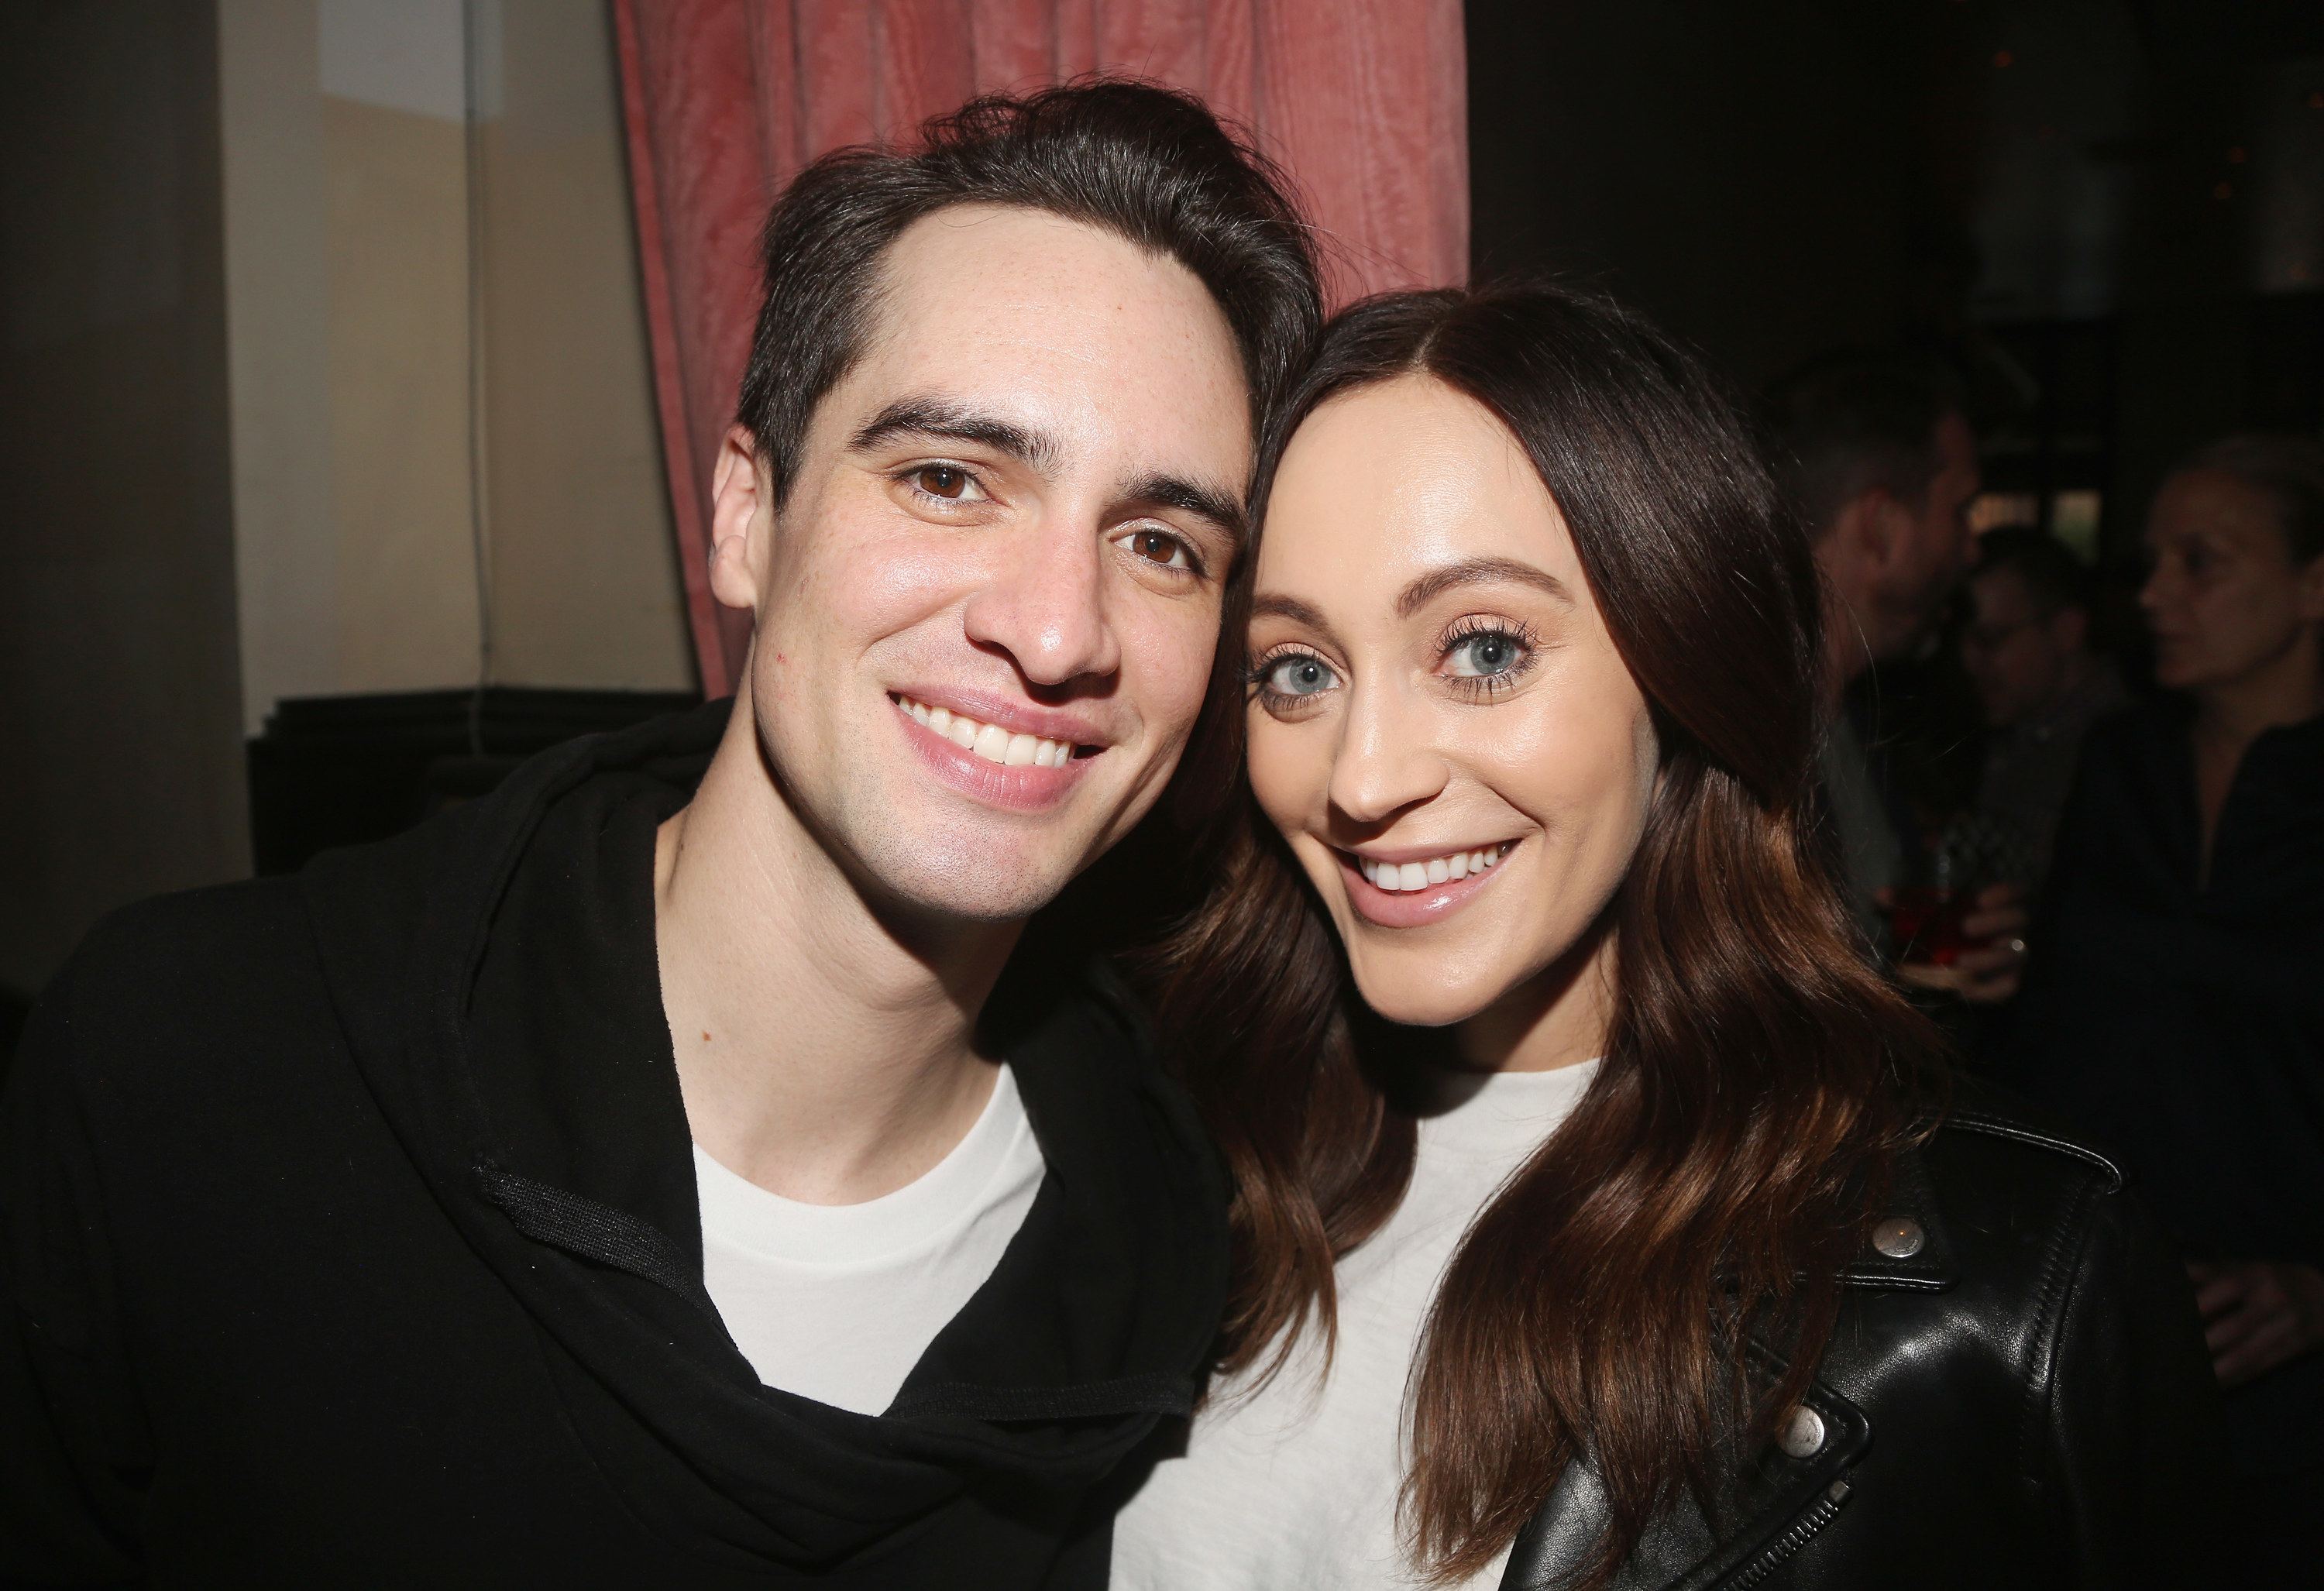 Brendon and his wife smiling